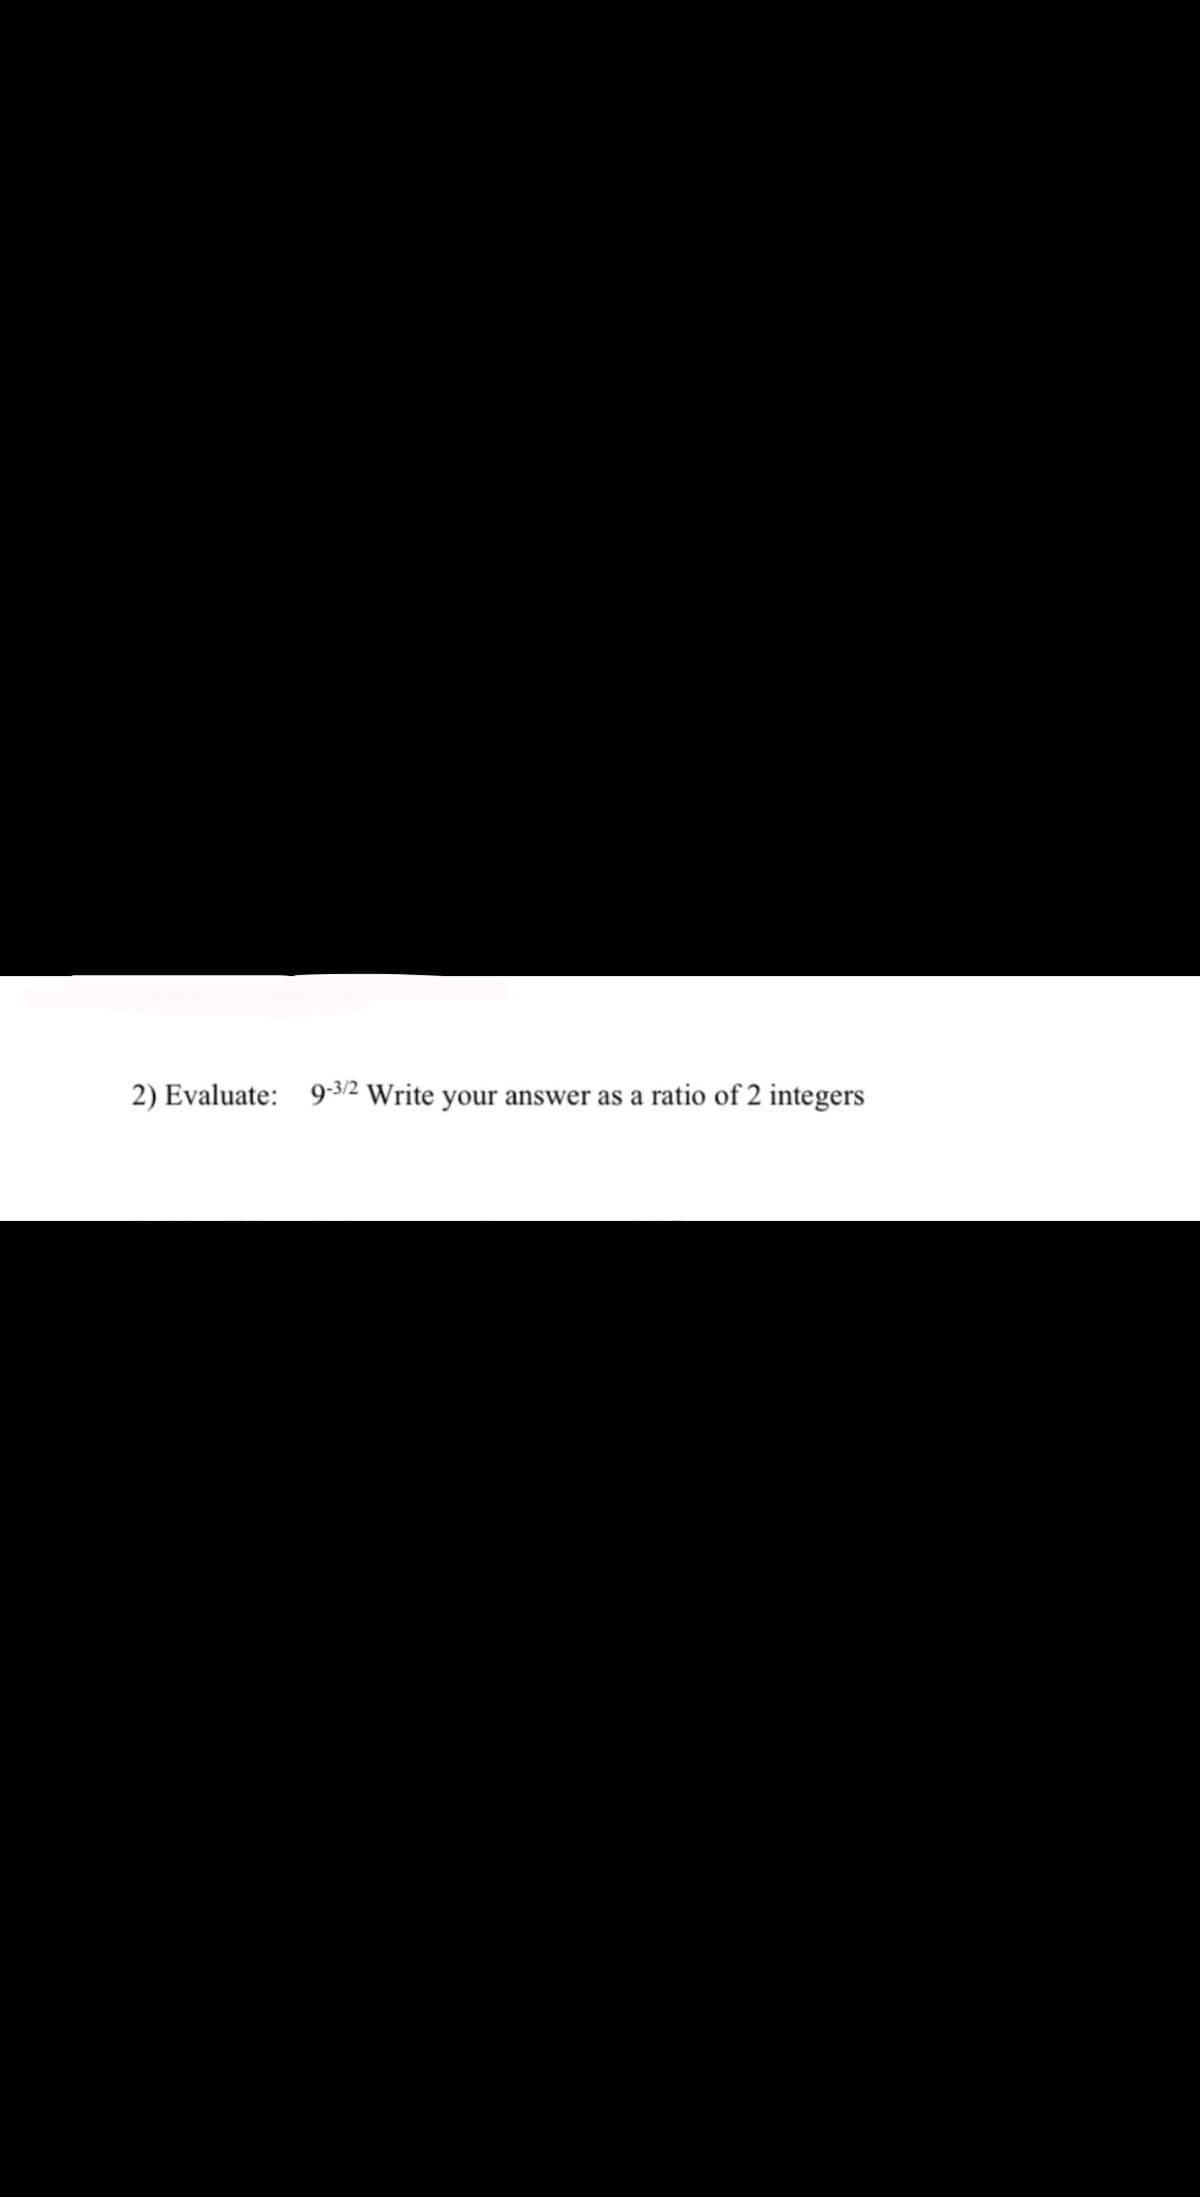 2) Evaluate: 9-3/2 Write your answer as a ratio of 2 integers